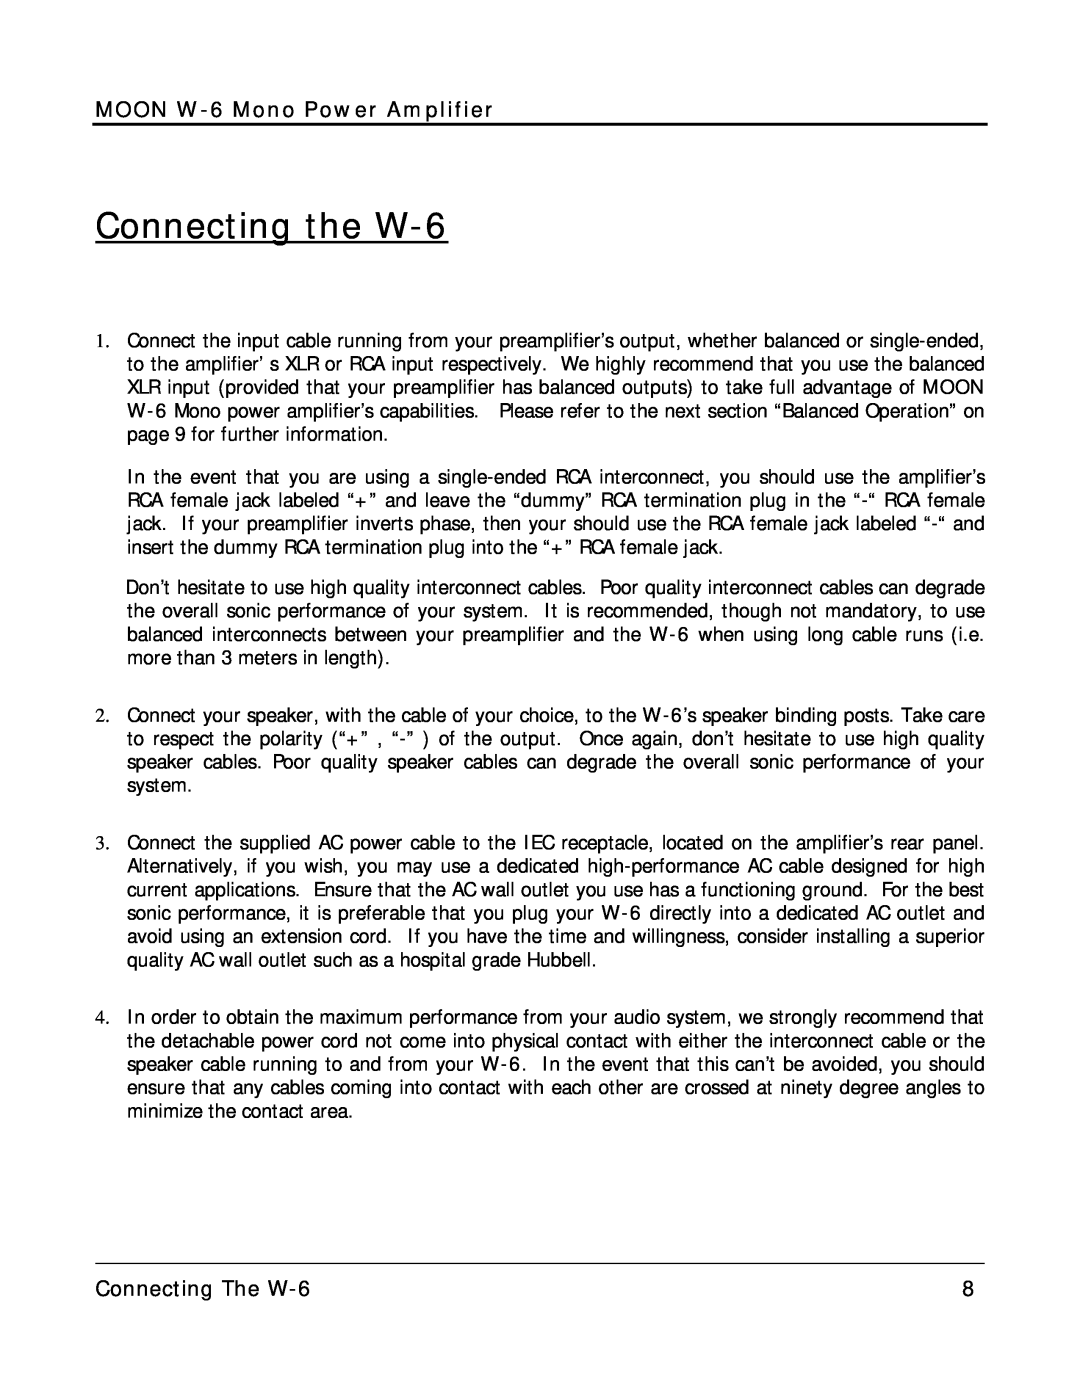 Simaudio owner manual Connecting the W-6, Connecting The W-6, MOON W-6Mono Power Amplifier 